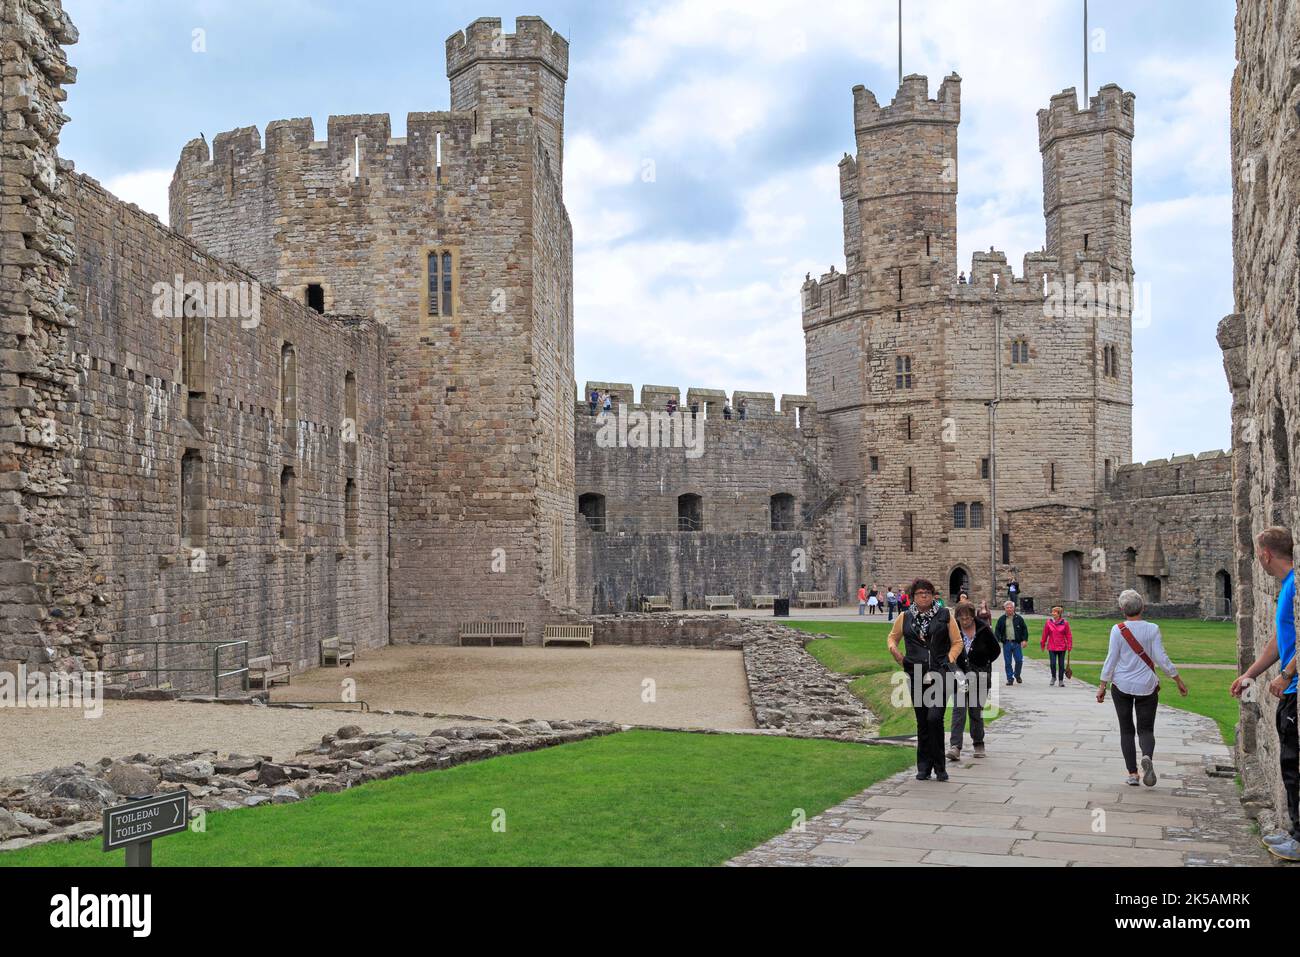 CAERNARFON, GREAT BRITAIN - SEPTEMBER 14, 2014: This is the courtyard of Caenarfon Castle, an outstanding example of the medieval architecture. Stock Photo